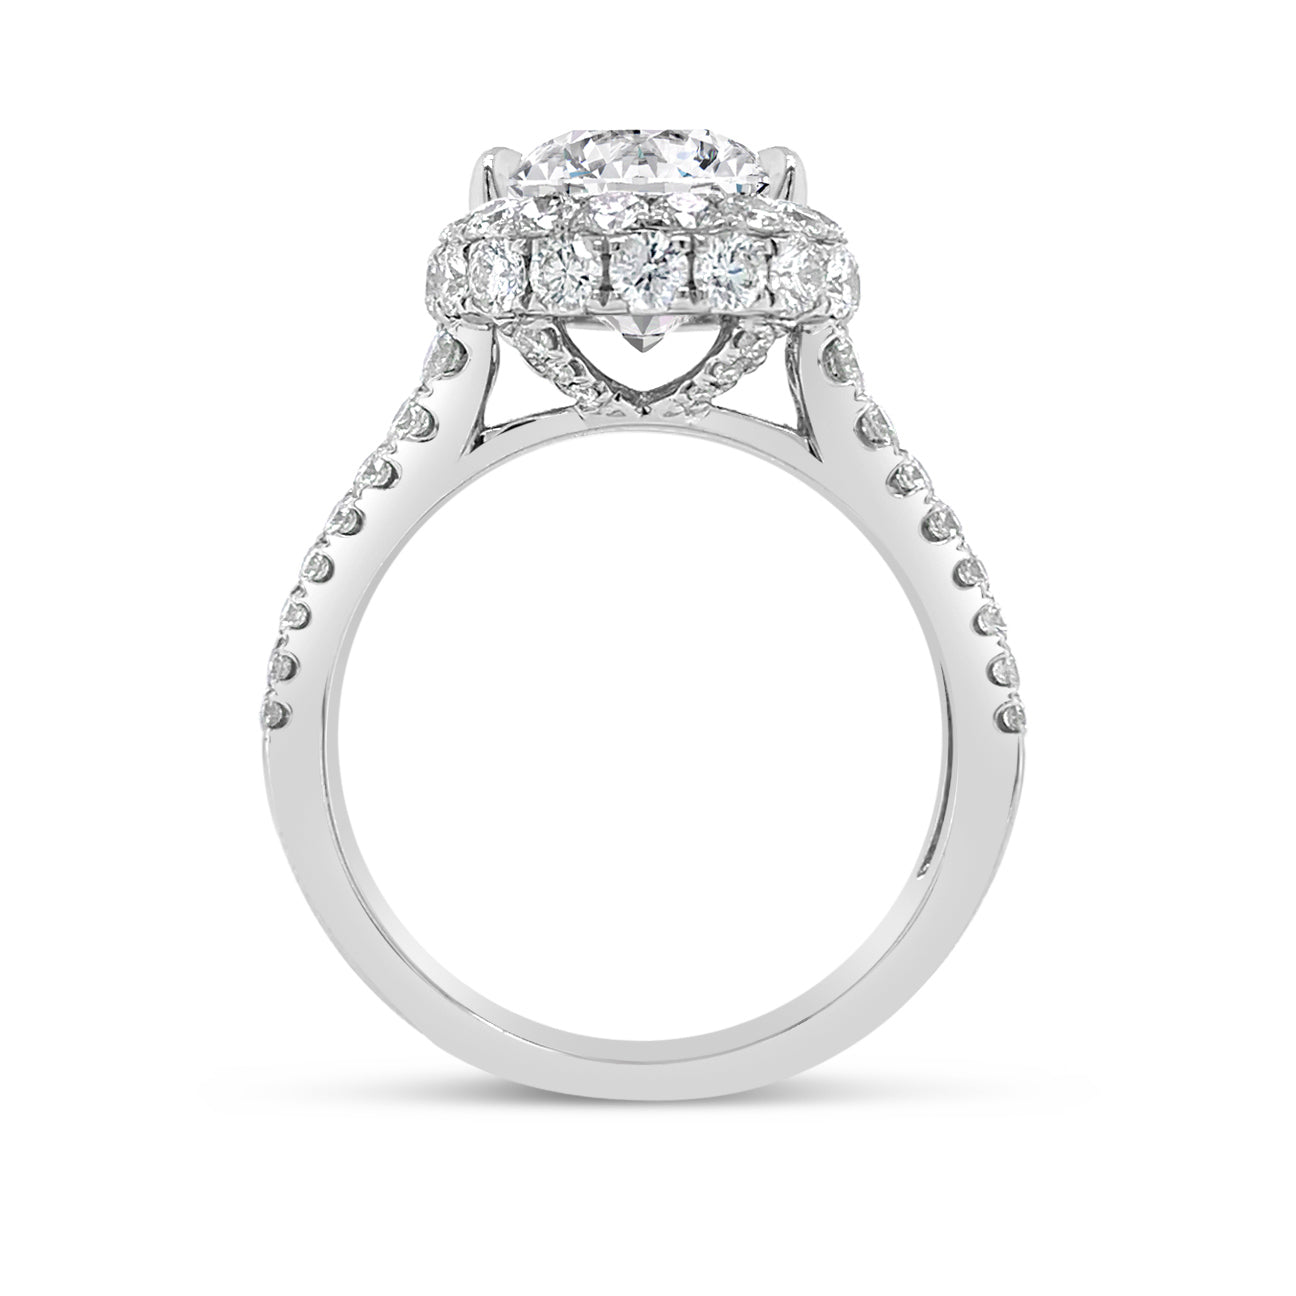 Double-Edge Halo Diamond Engagement Ring with Diamond Gallery  -18K weighting 5.07 GR  - 76 round diamonds totaling 1.48 carats